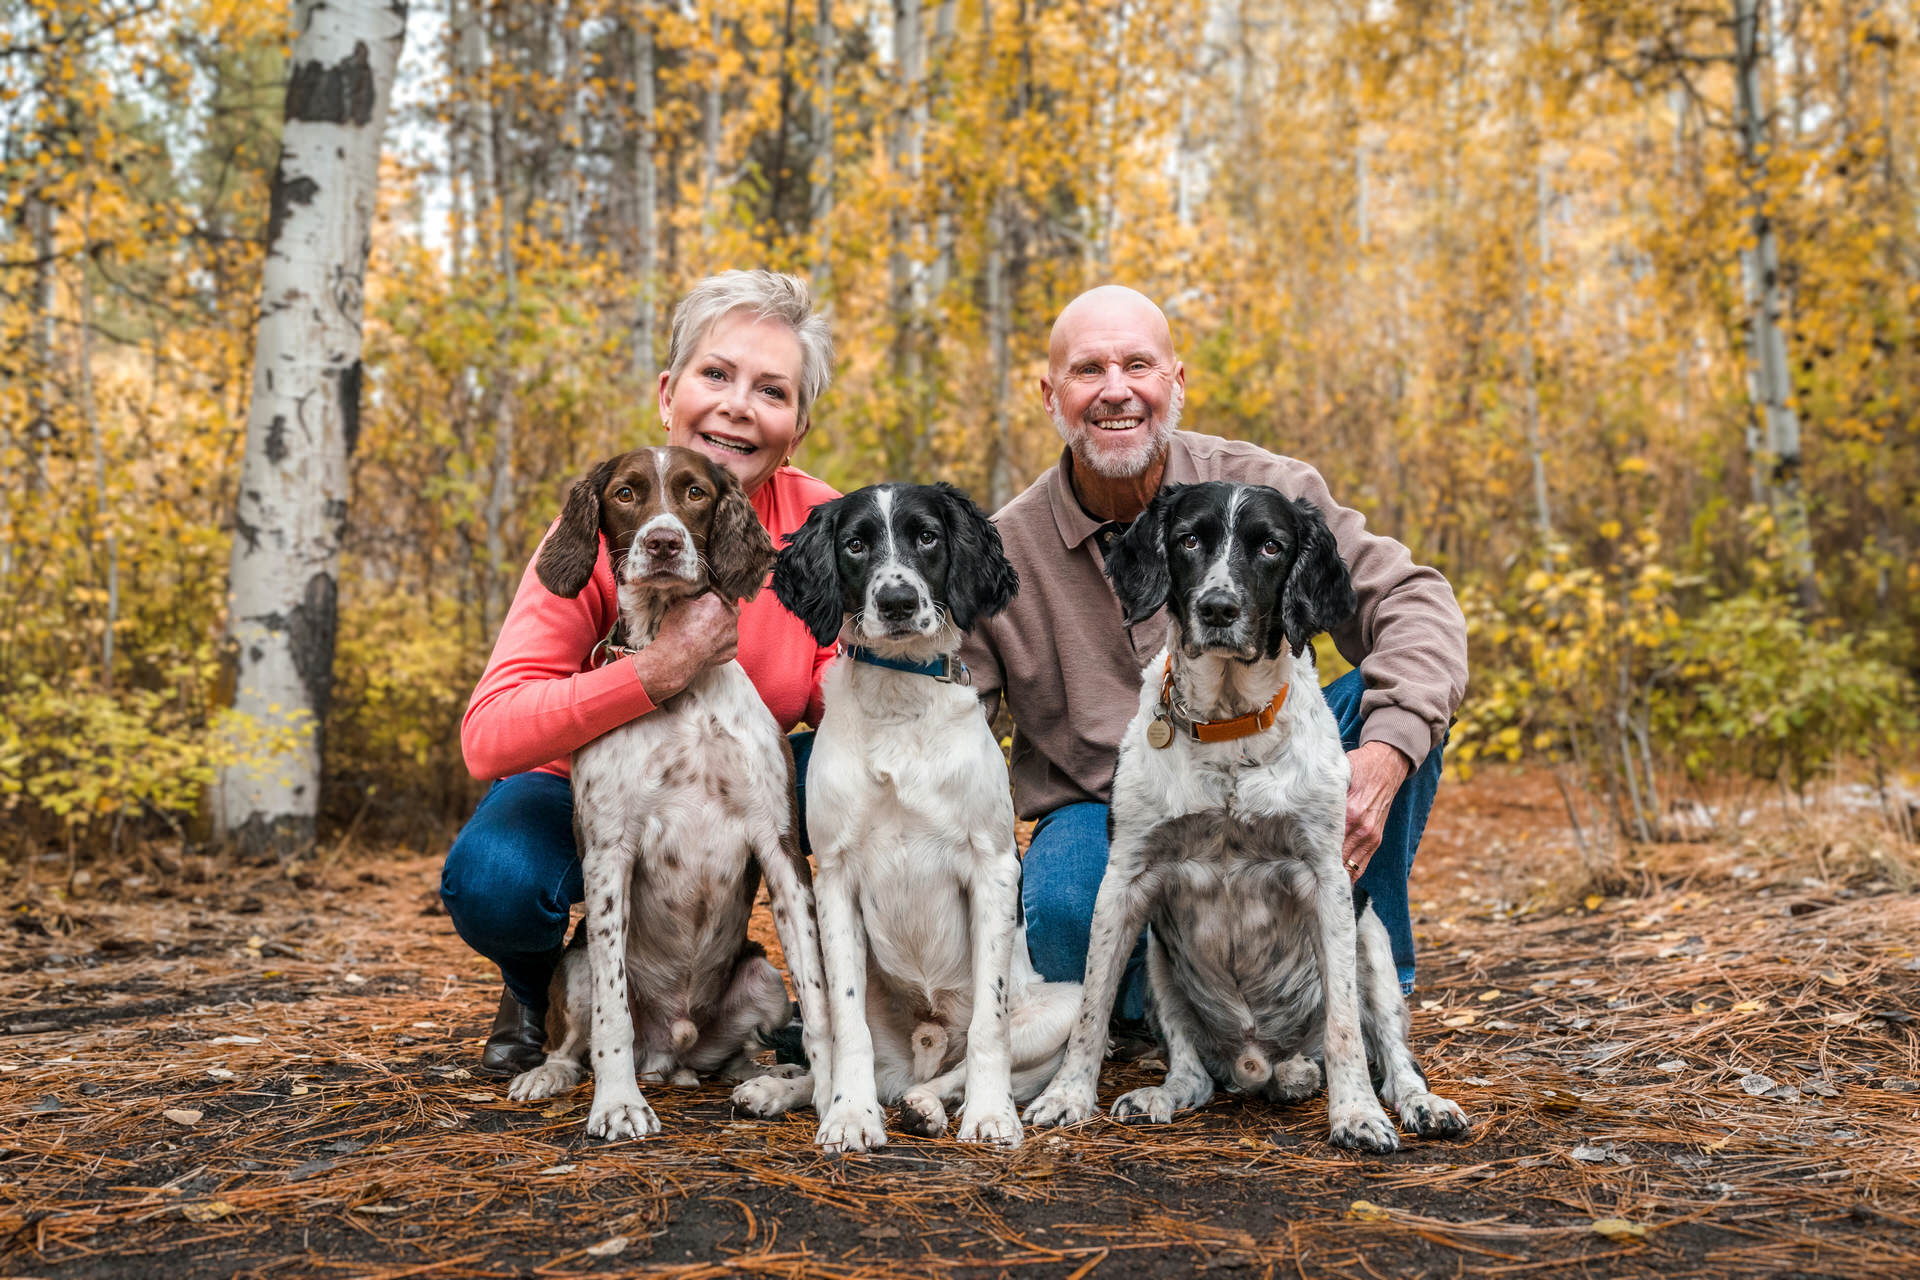 couple and their three springer spaniel dogs pose together in the autumn